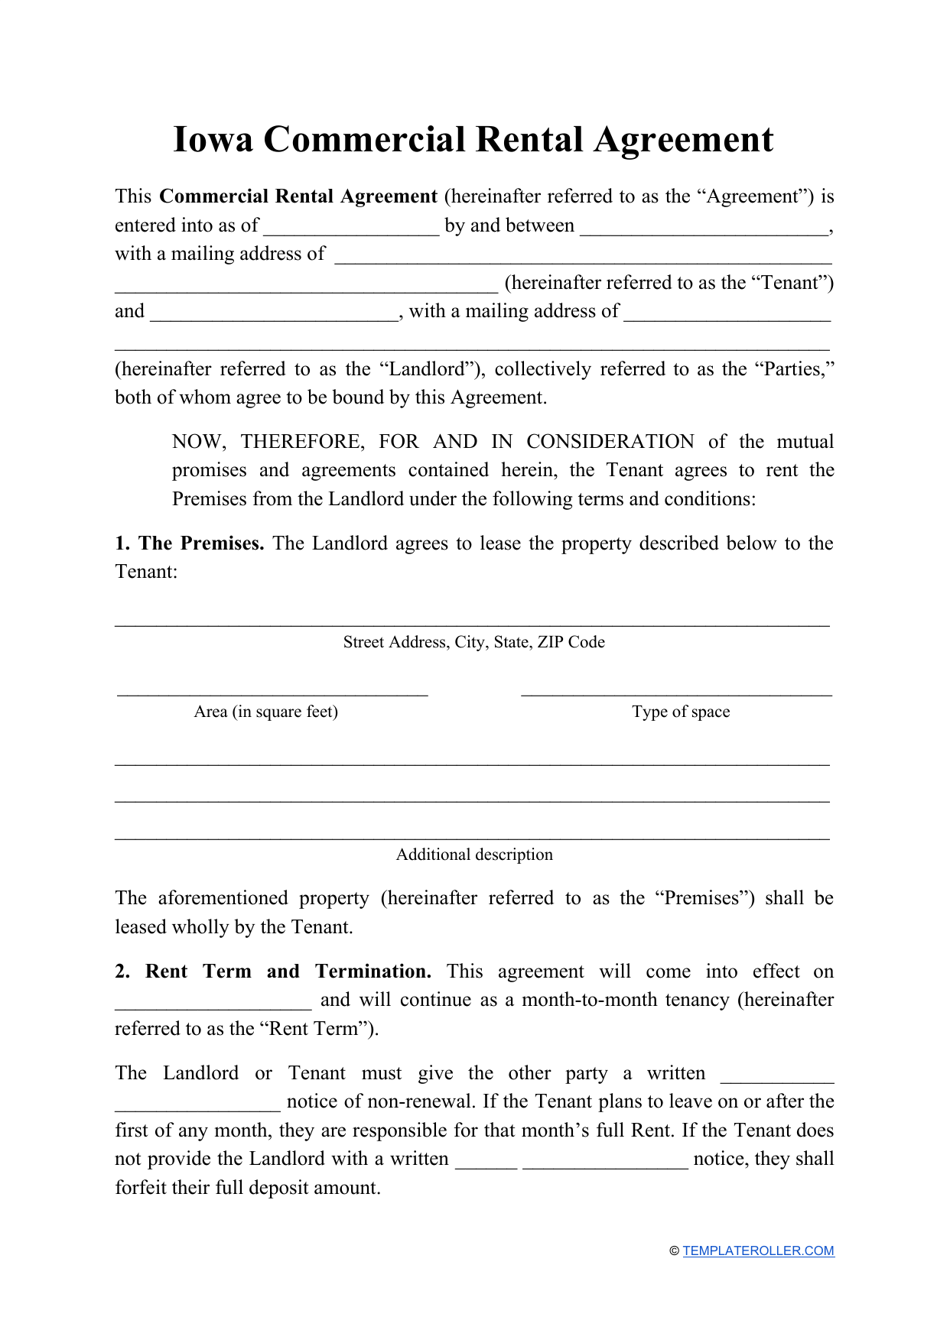 Commercial Rental Agreement Template - Iowa, Page 1